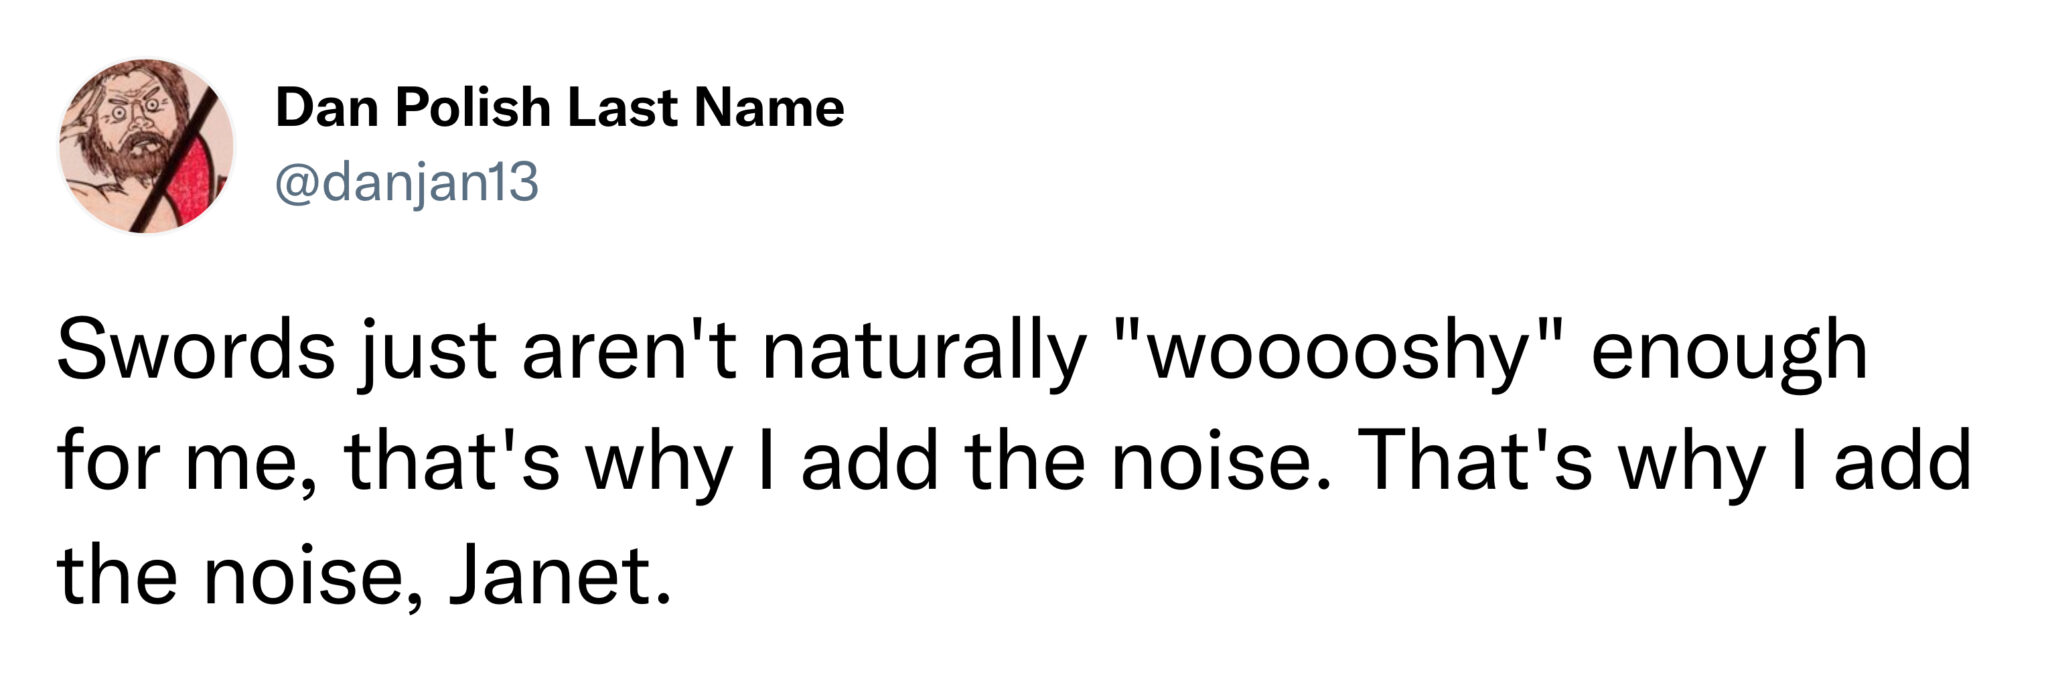 funny tweets and memes -  your girl is drunk - Dan Polish Last Name Swords just aren't naturally "wooooshy" enough for me, that's why I add the noise. That's why I add the noise, Janet.